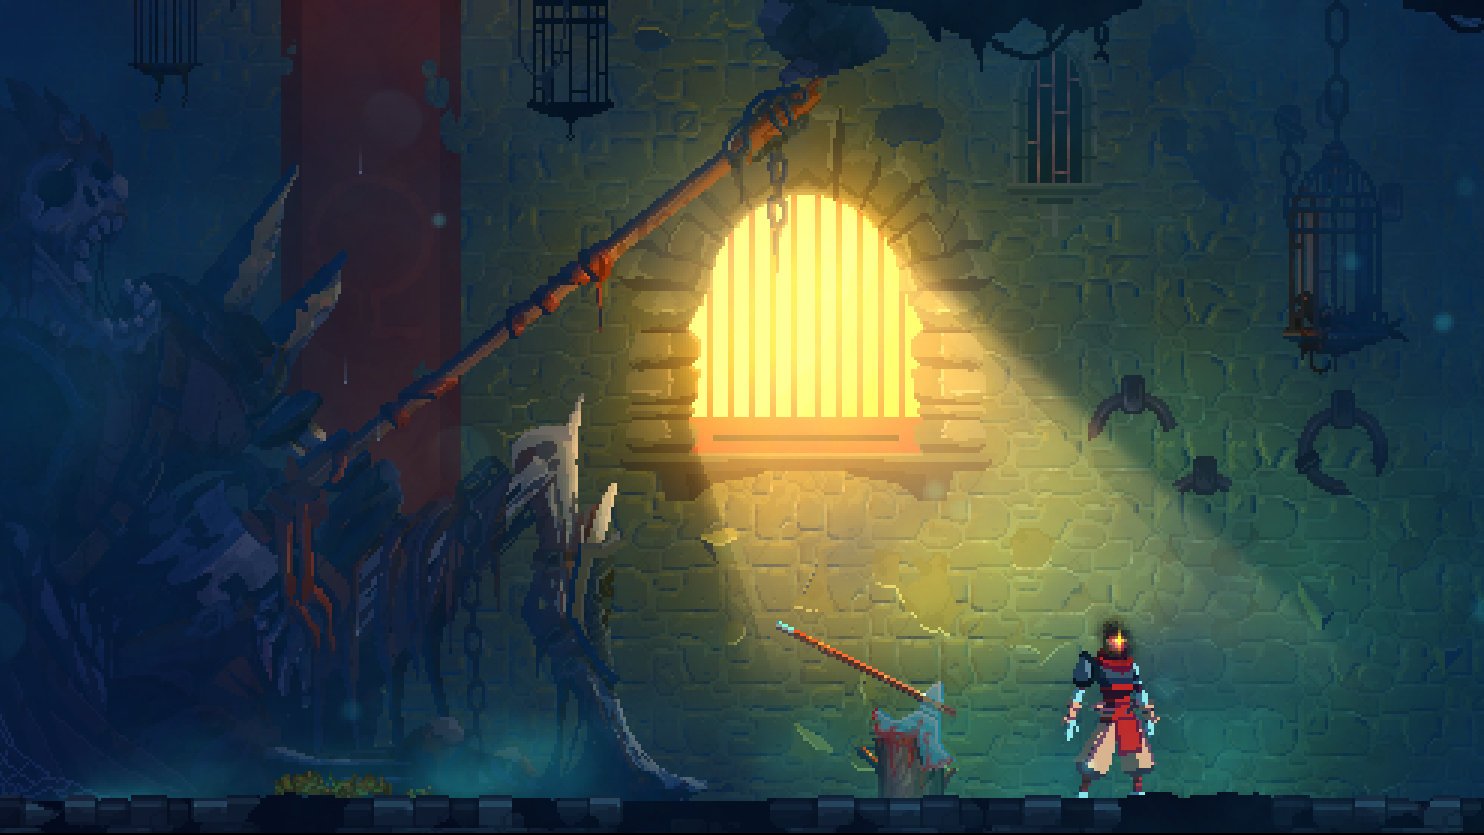 Dead Cells launches on Consoles and PC August 7